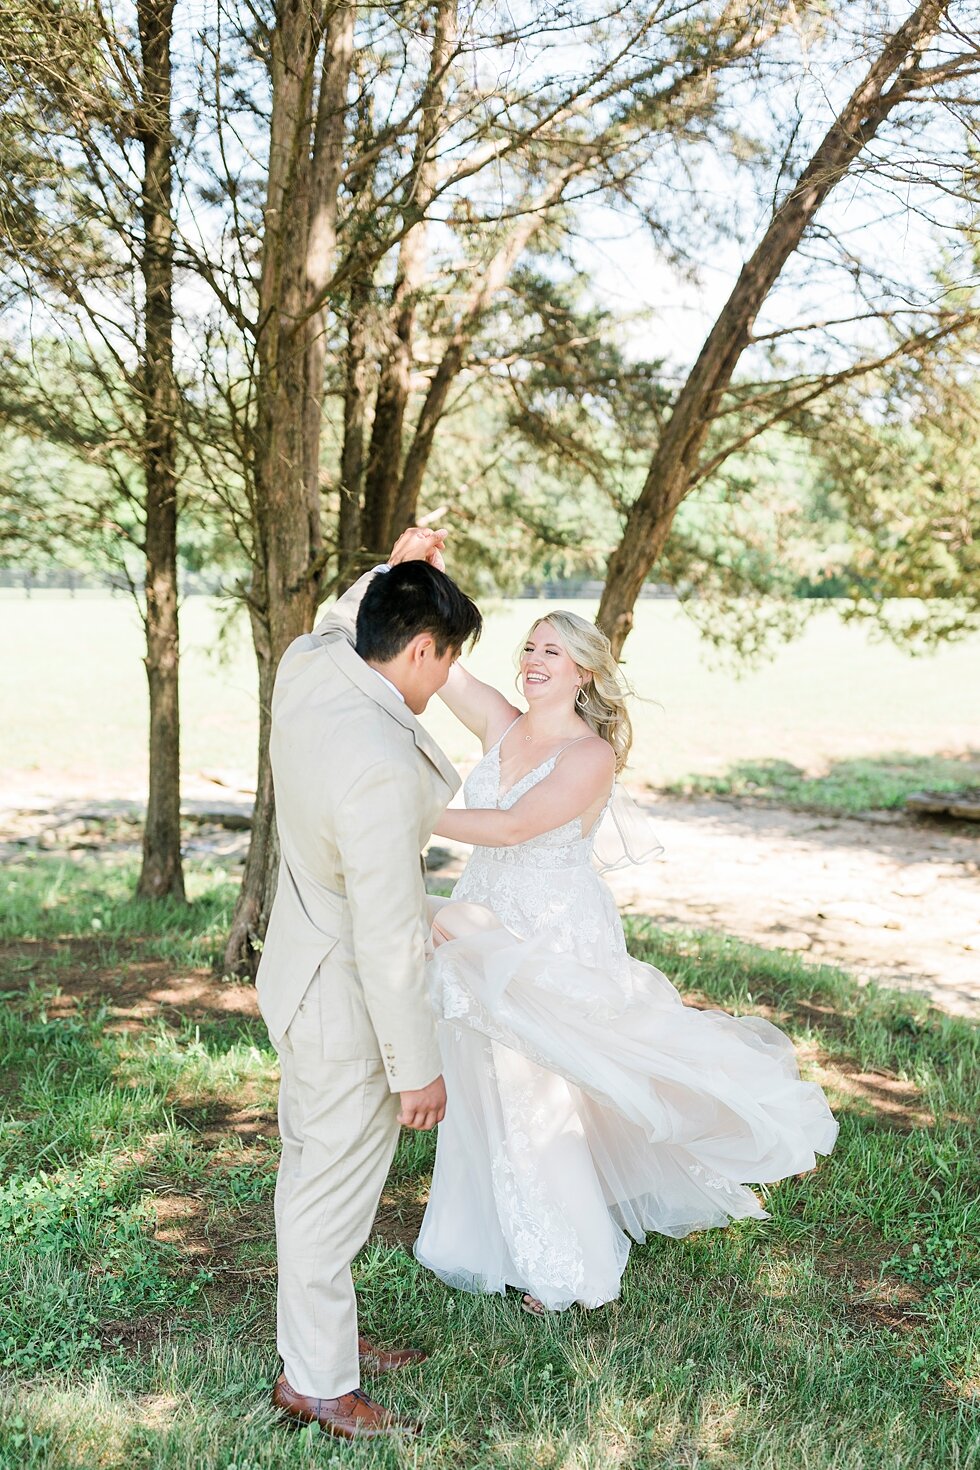  Dancing and laughing together after this wonderful couple tied the knot during their romantic and intimate backyard wedding! Romantic casual lace wedding gown close friends neutral colors background wedding natural greenery crisp white #midwestphoto